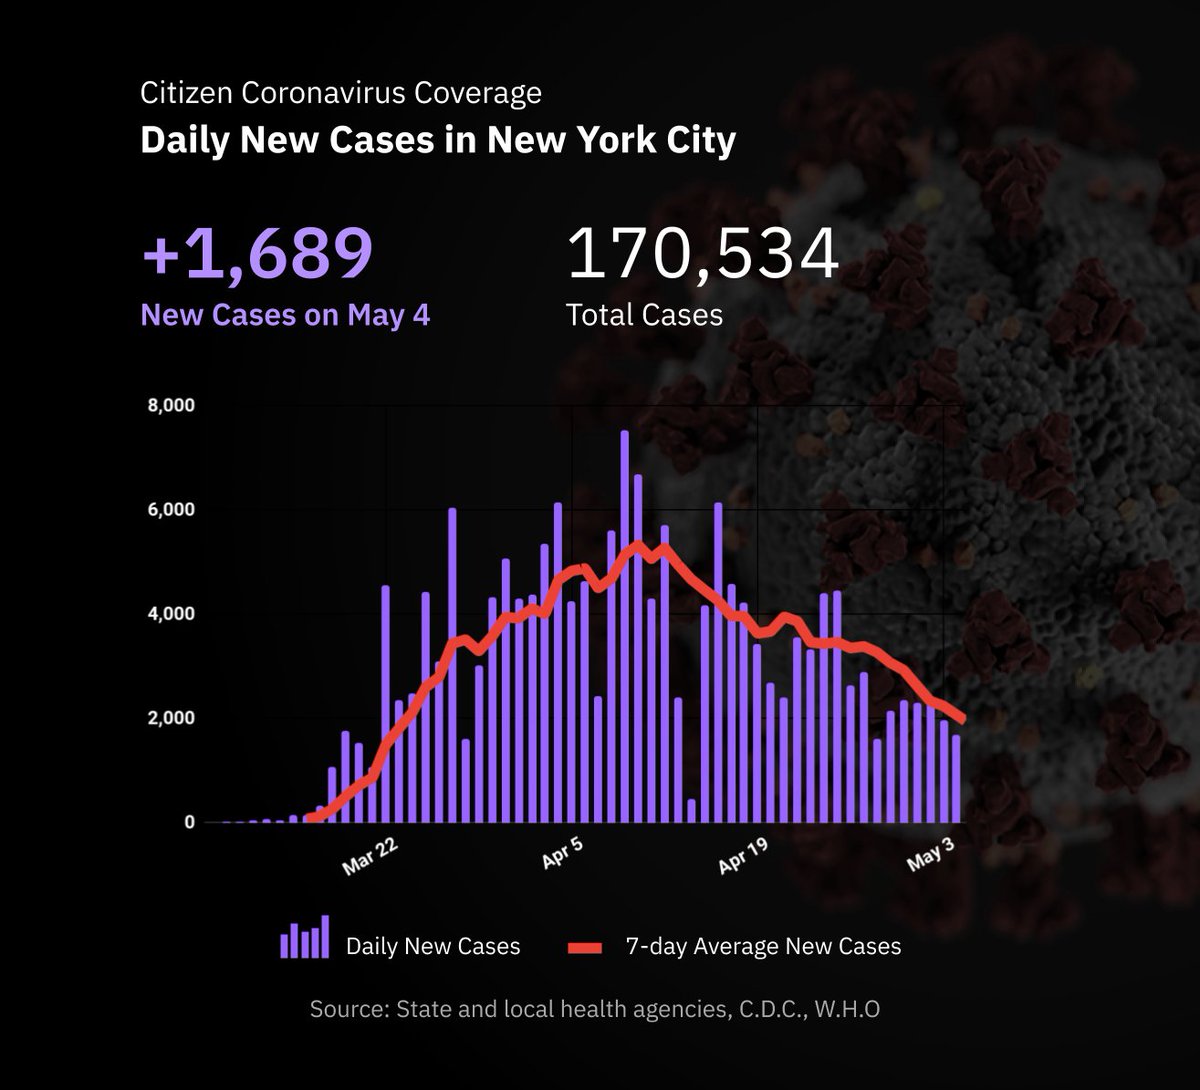 🦠 170,534 confirmed cases of coronavirus in NYC
🏥 Hospitalizations, intubations, and # of new cases down
🔬 1,689 cases reported on May 4th
⏸️ NYS PAUSE order set to expire May 15th

#CoronavirusNYC #Citizen